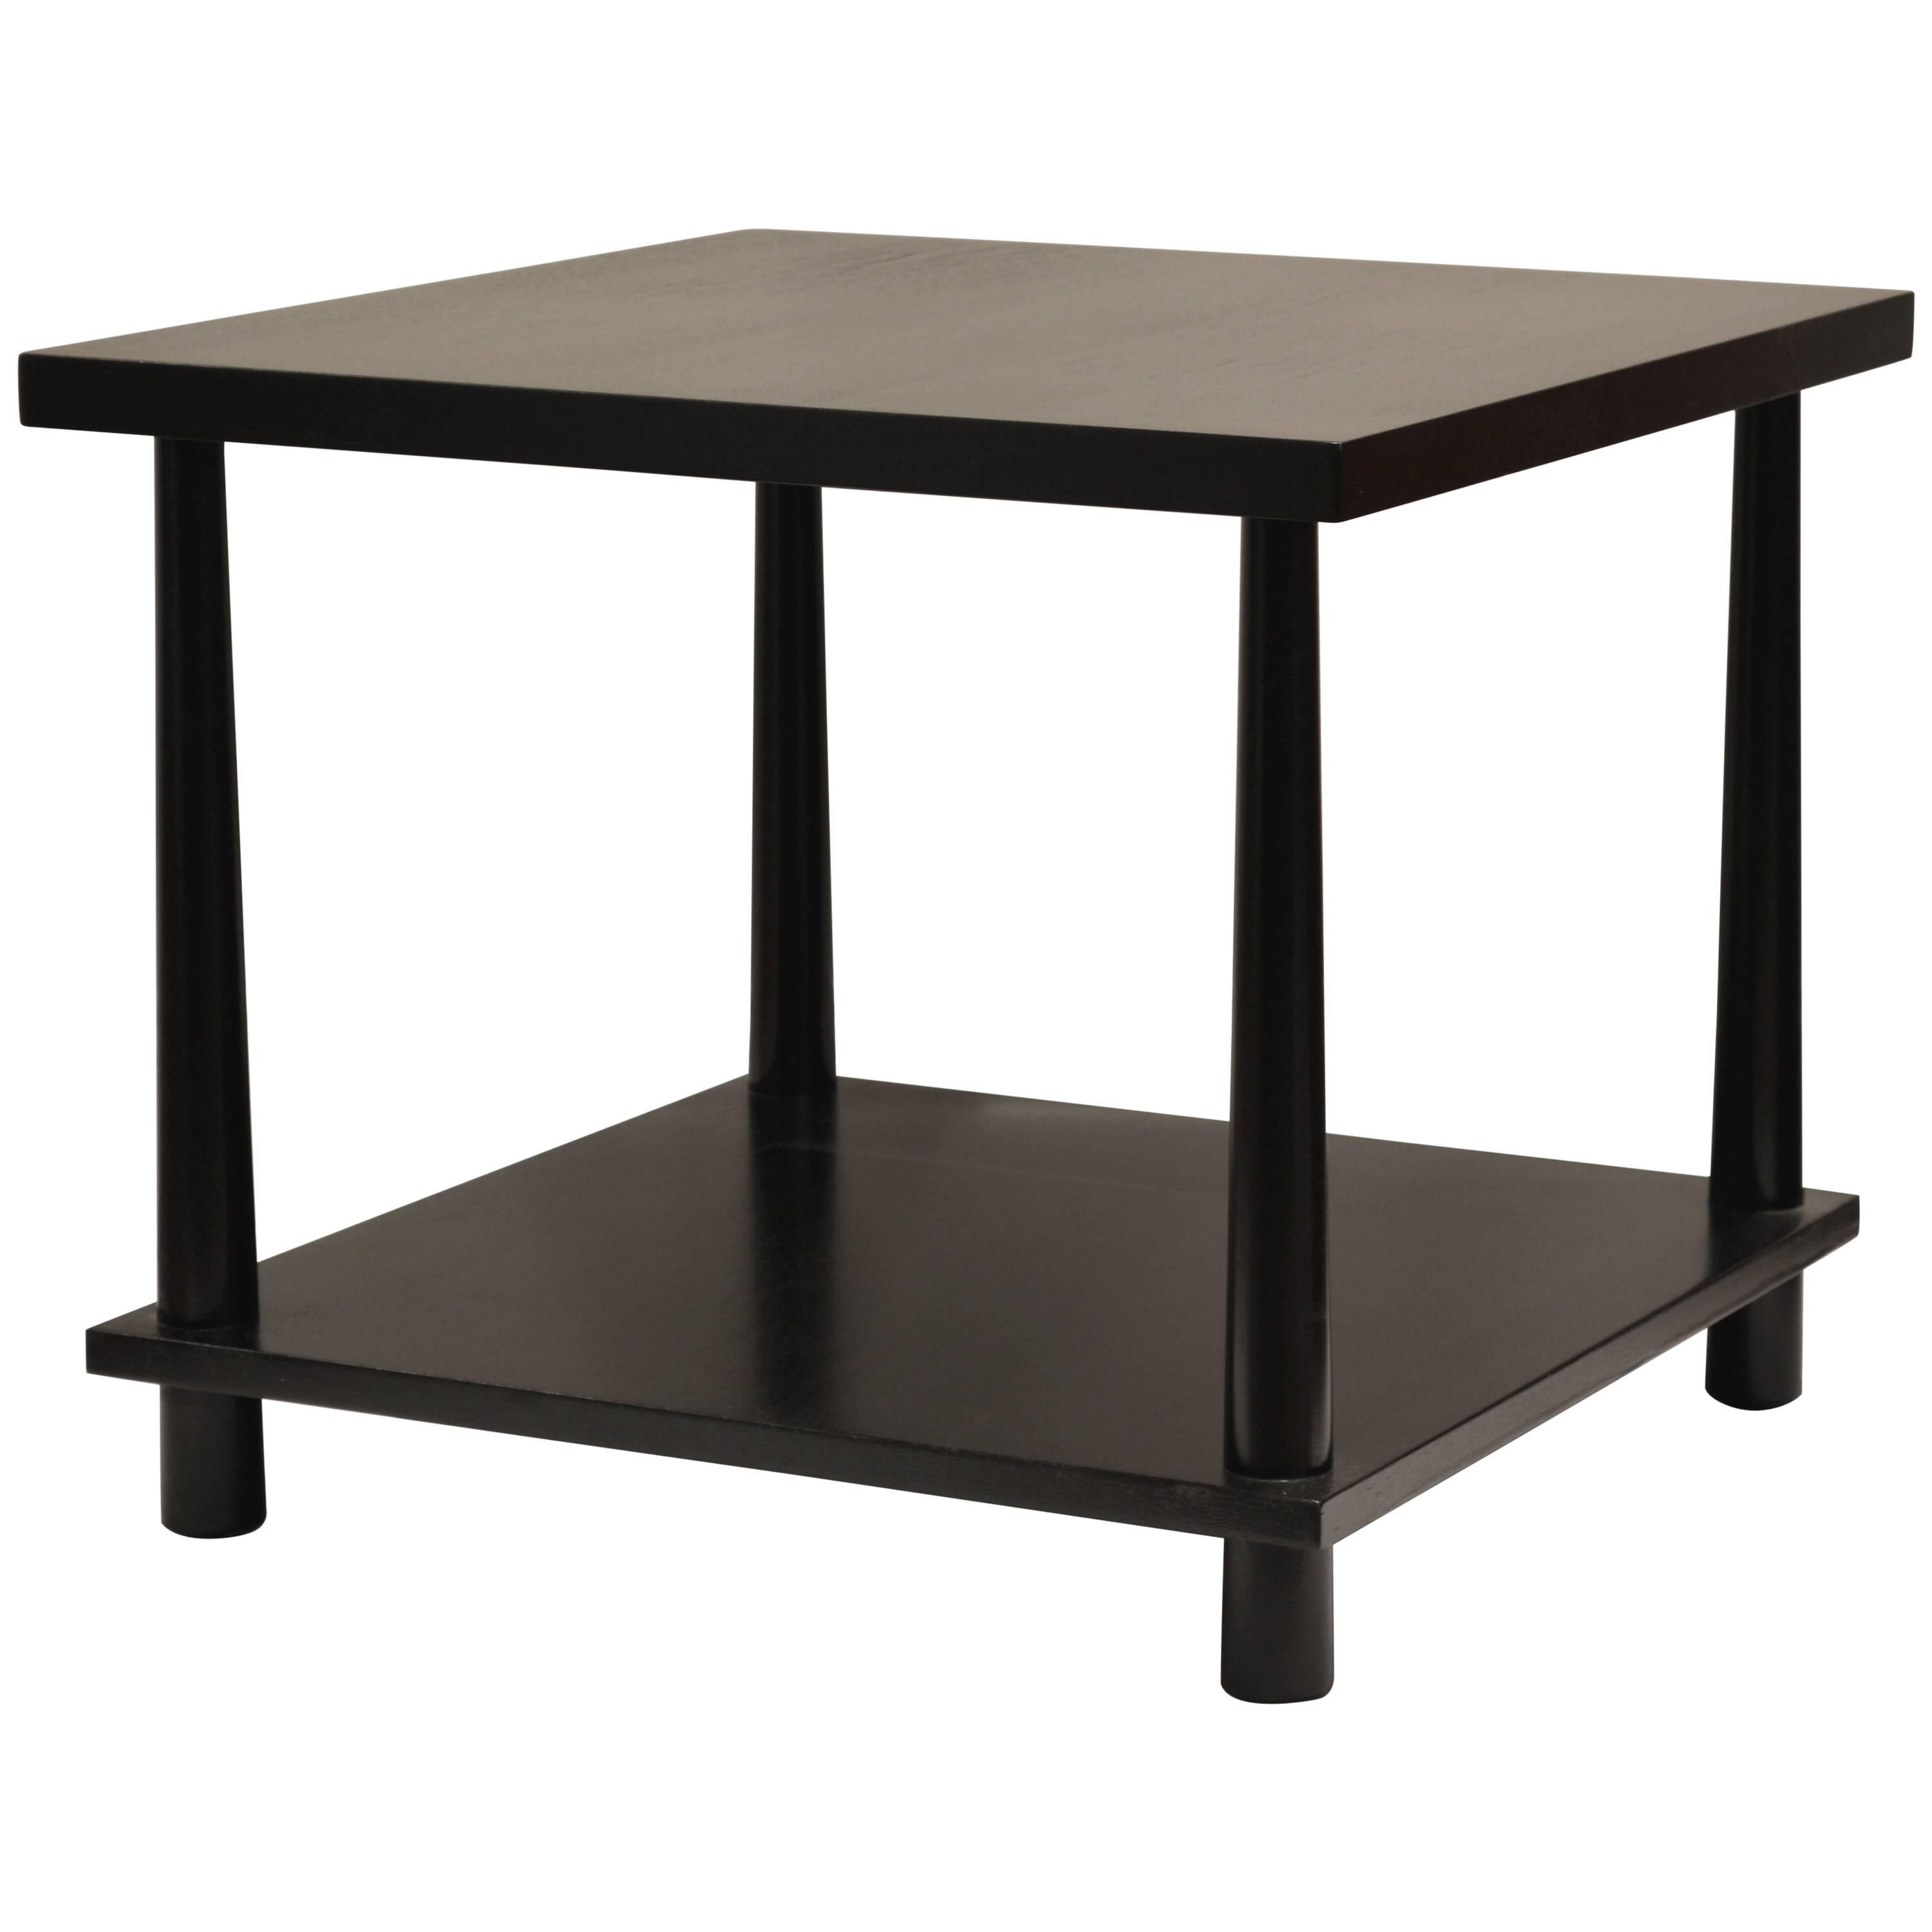 Reverse tapered leg square side table with black lacquered finish. With original label 